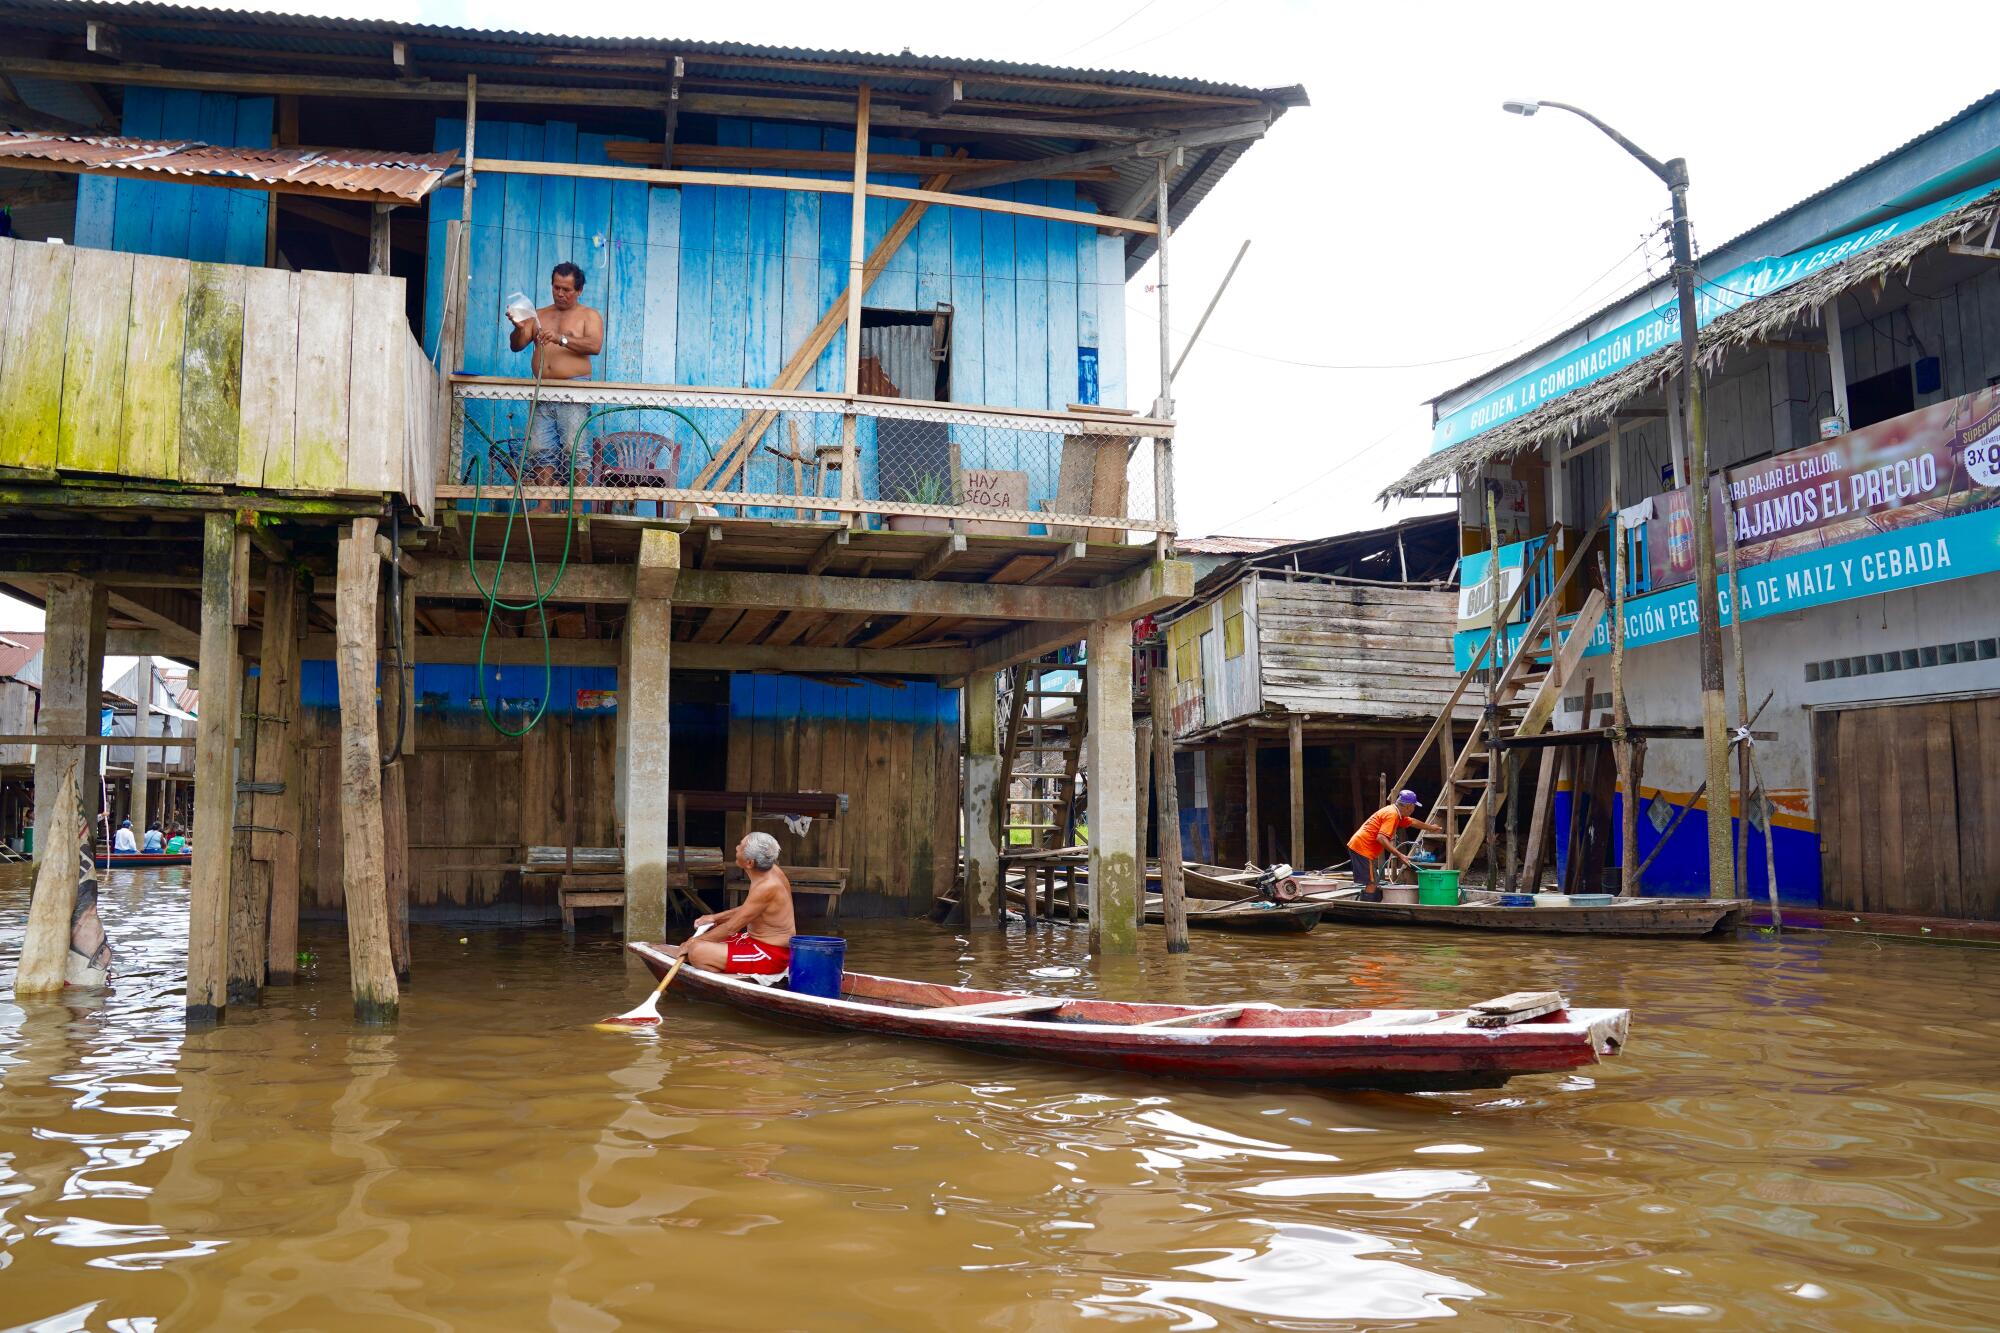 Houses built on stilts in the Amazon River port of Belen in Iquitos, Peru.